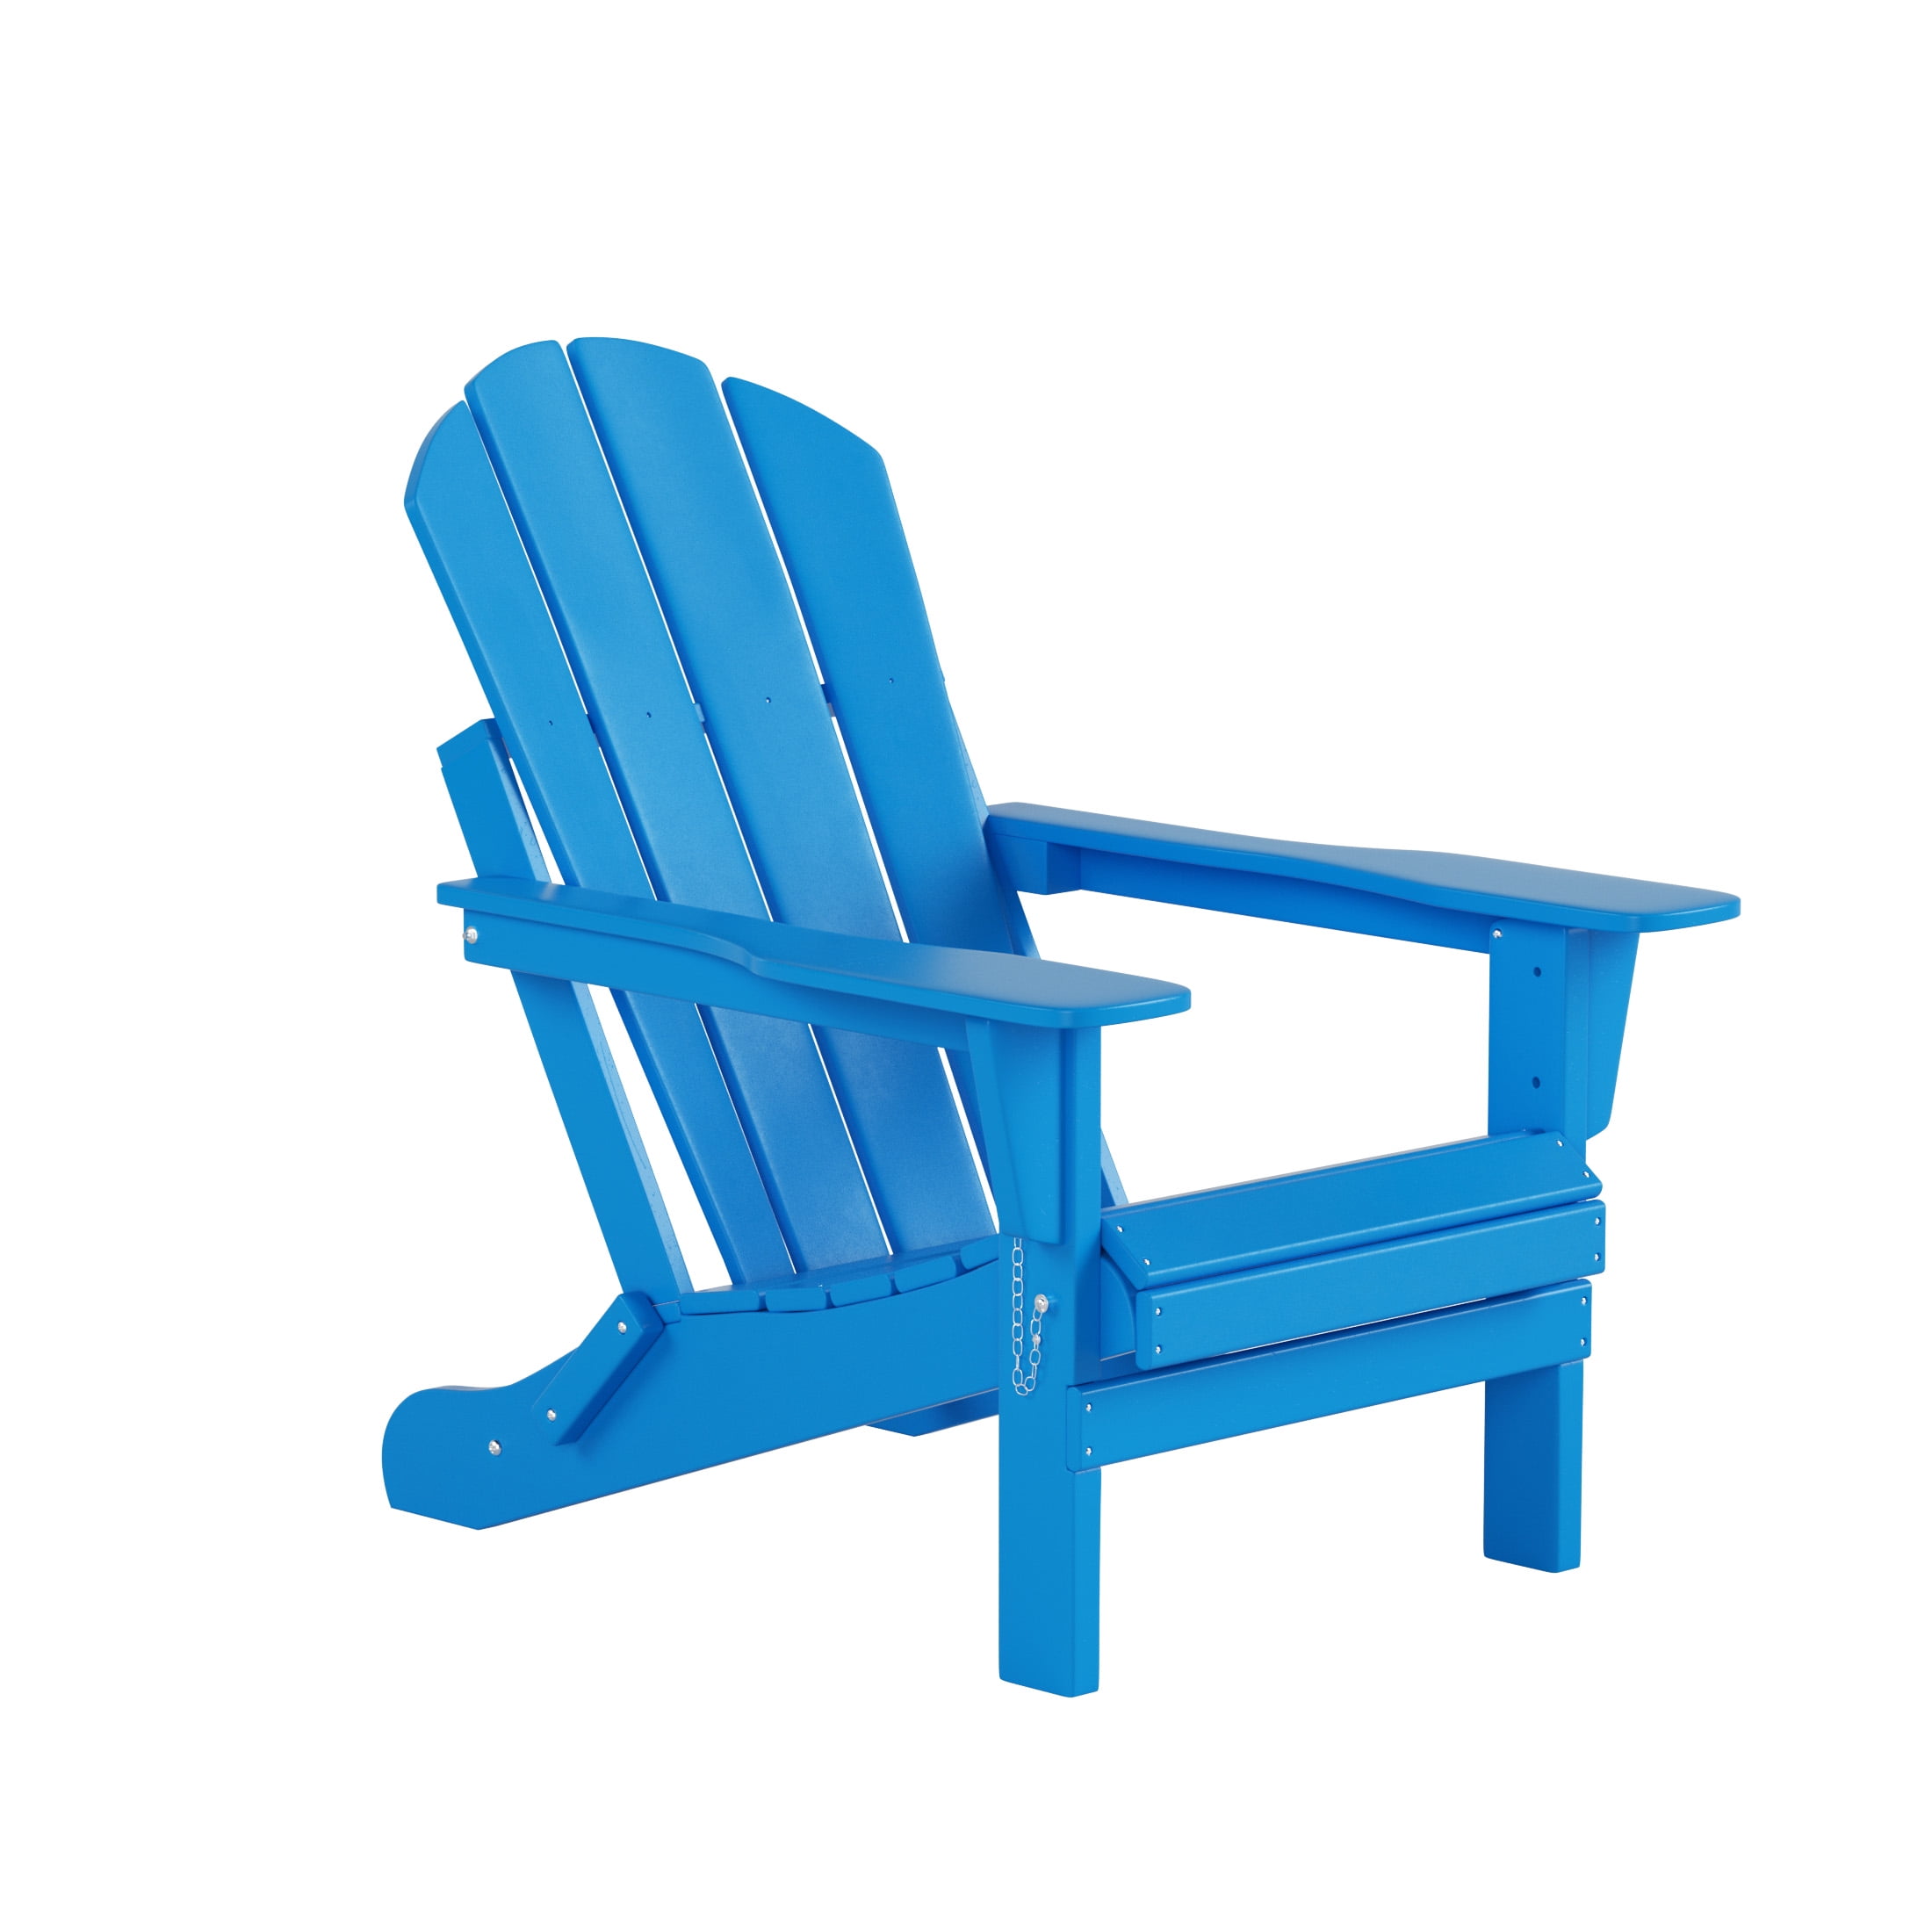 WestinTrends Outdoor Folding Poly Adirondack Chair, Pacific Blue